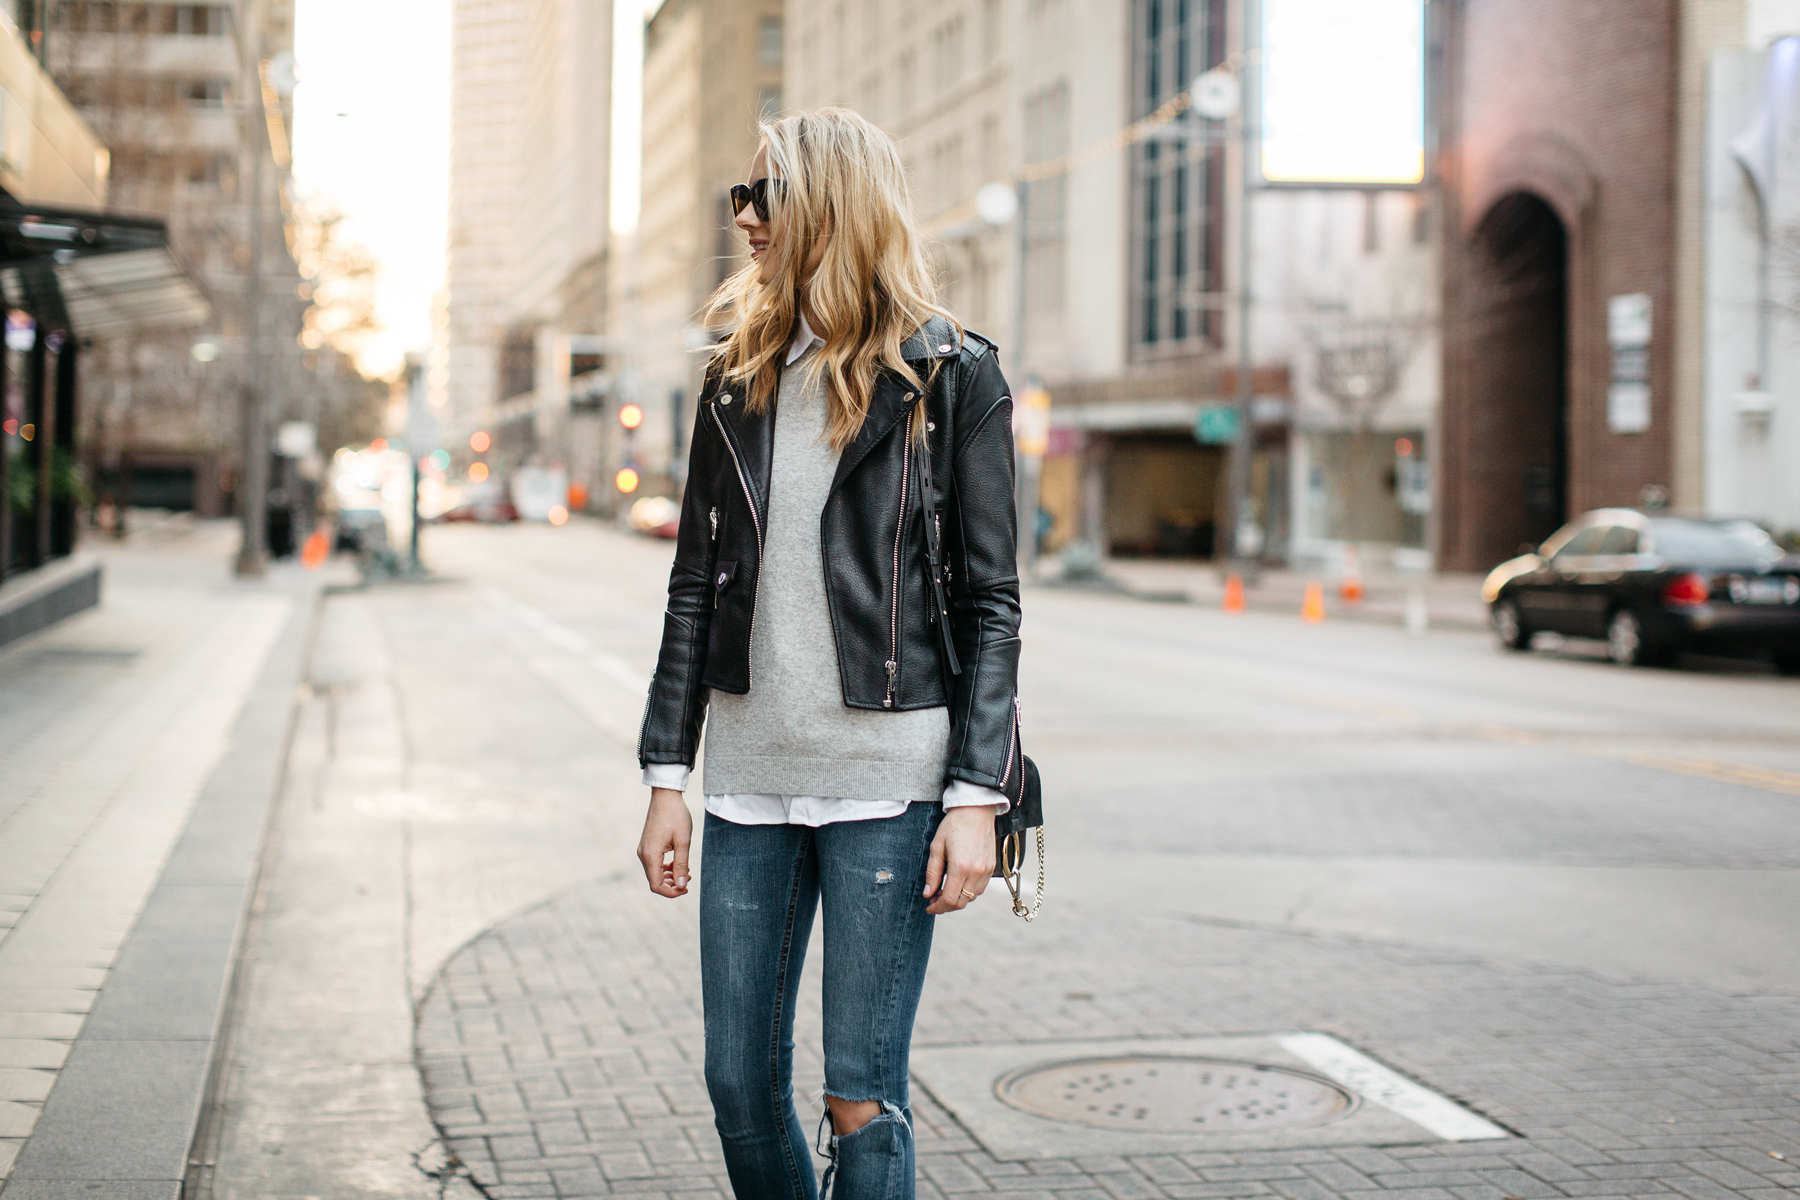 Fall Outfit, Winter Outfit, Black Leather Jacket, Grey Sweater, White Button-Down Shirt, Denim Ripped Skinny Jeans